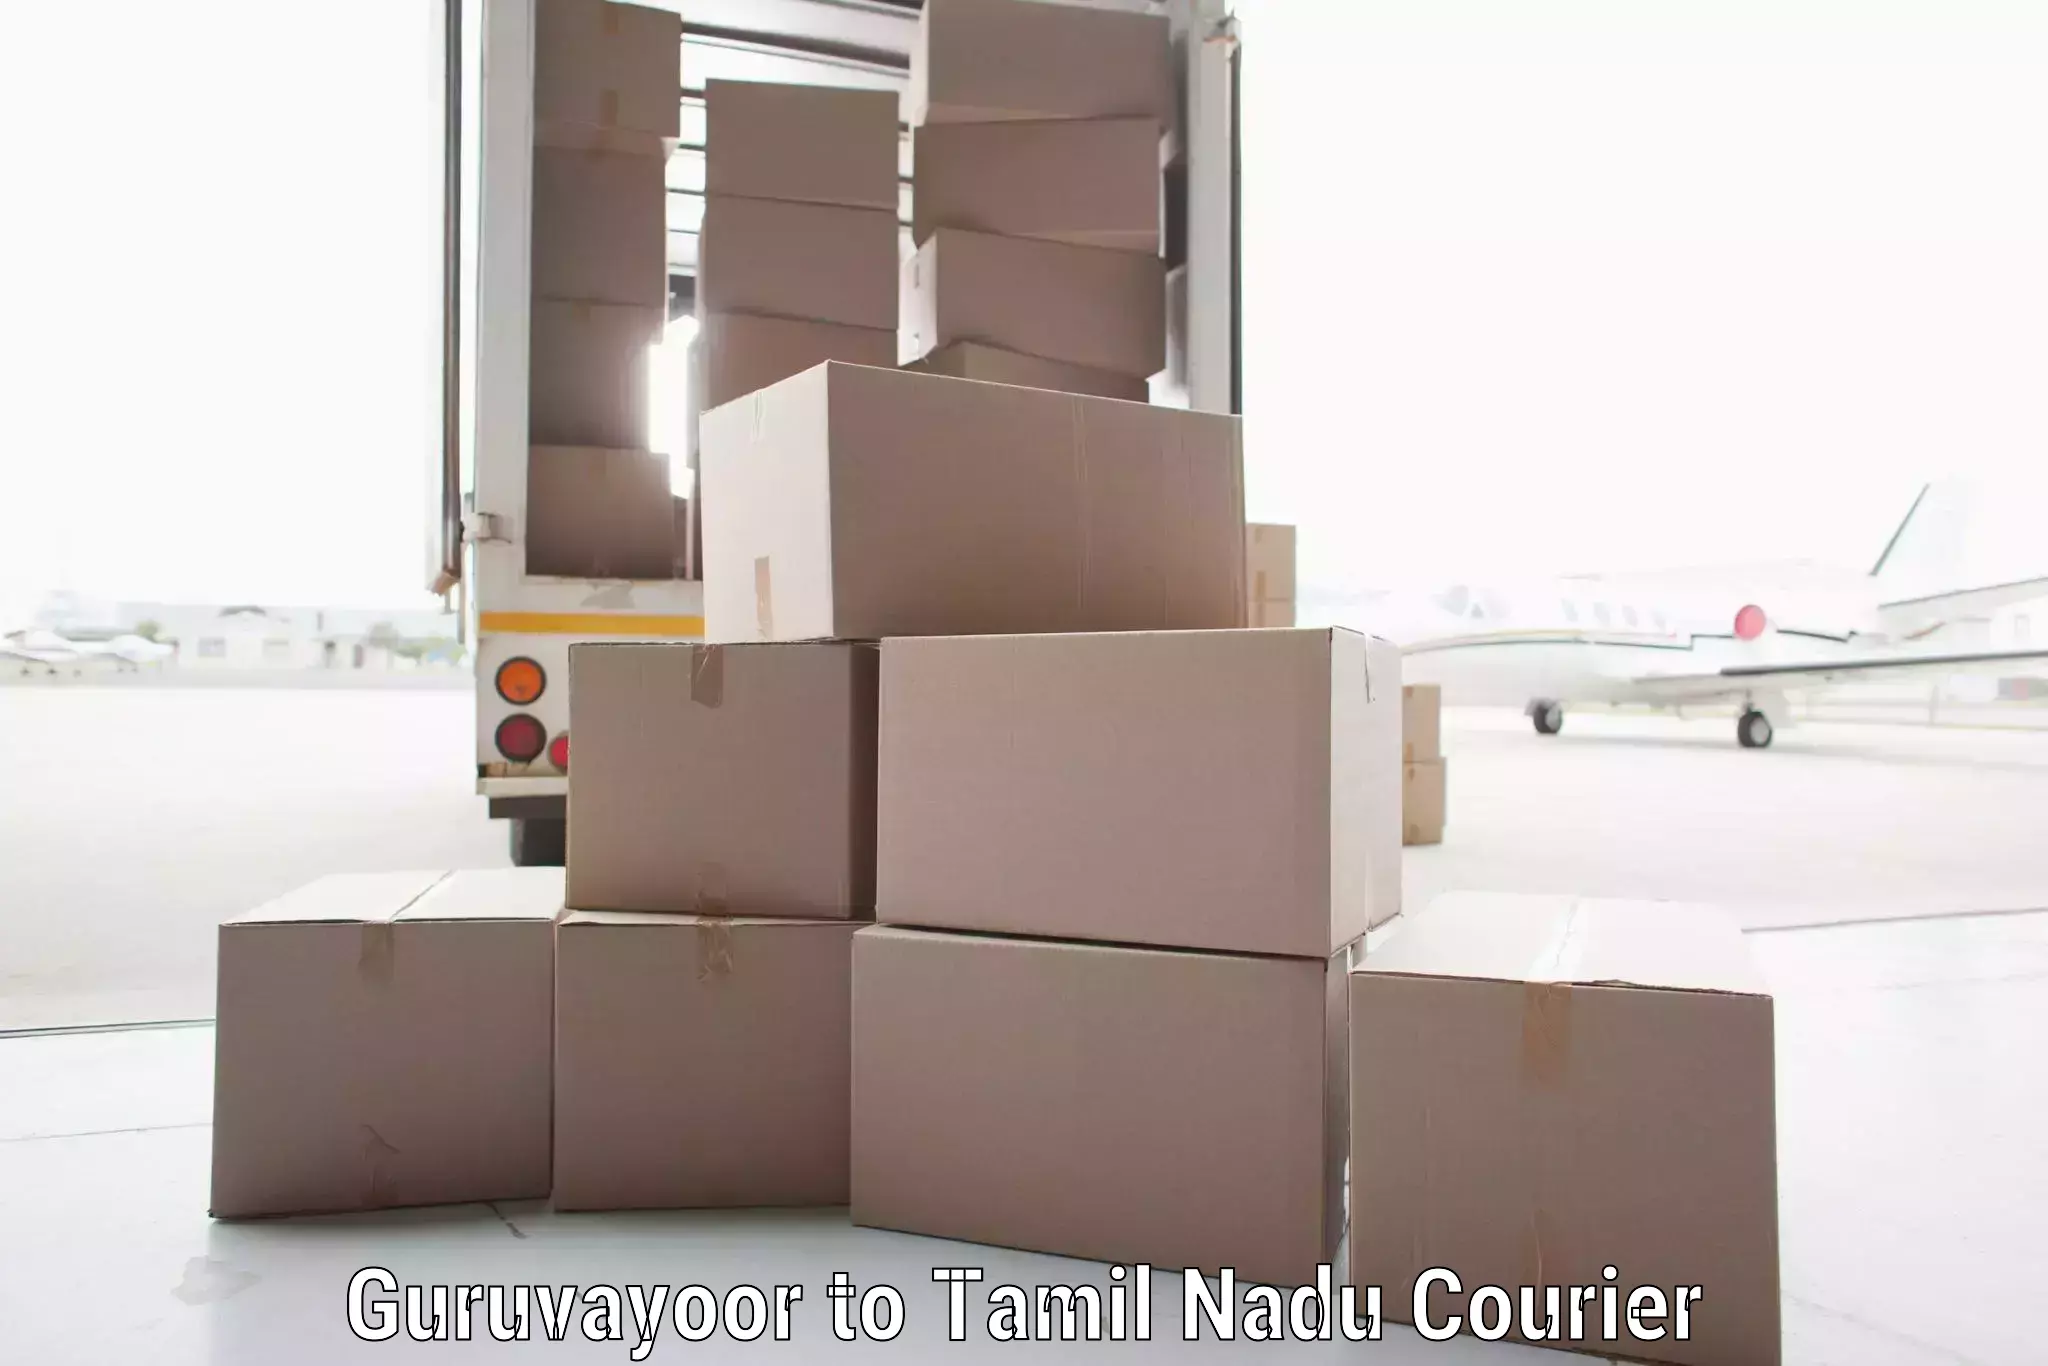 Affordable parcel service Guruvayoor to Ennore Port Chennai